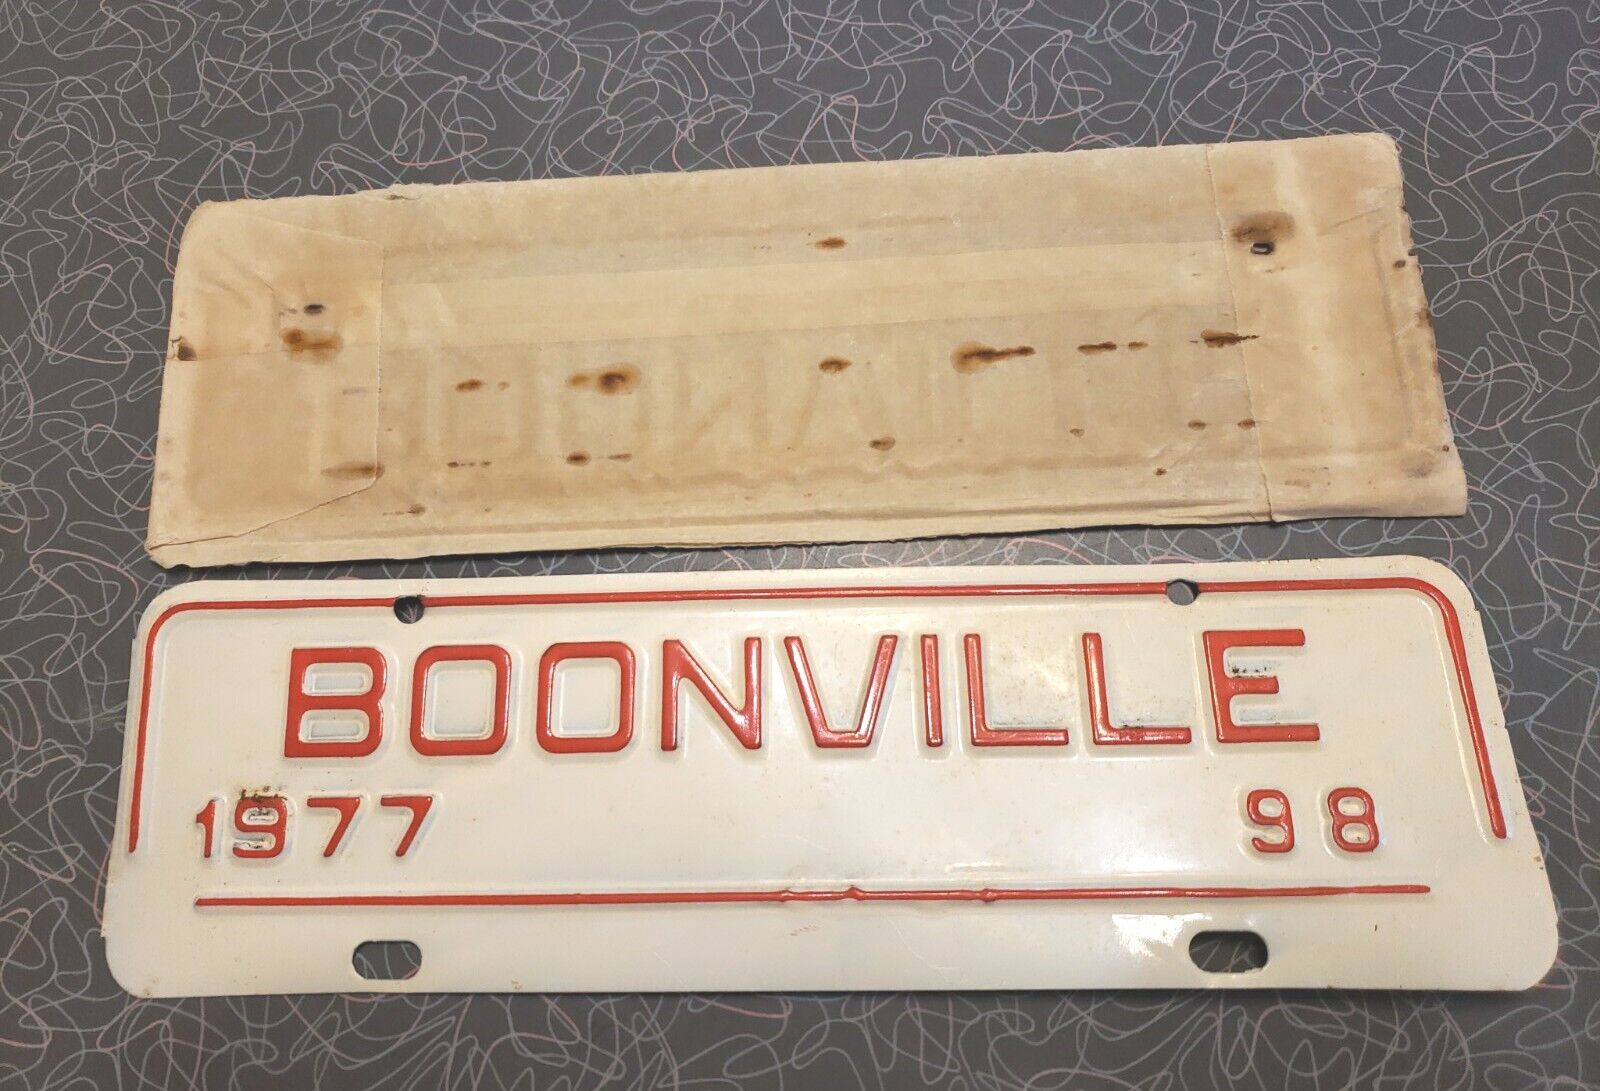 Boonville NC NORTH CAROLINA CITY LICENSE PLATE TAX TAG TOPPER   # 98 1977 NOS